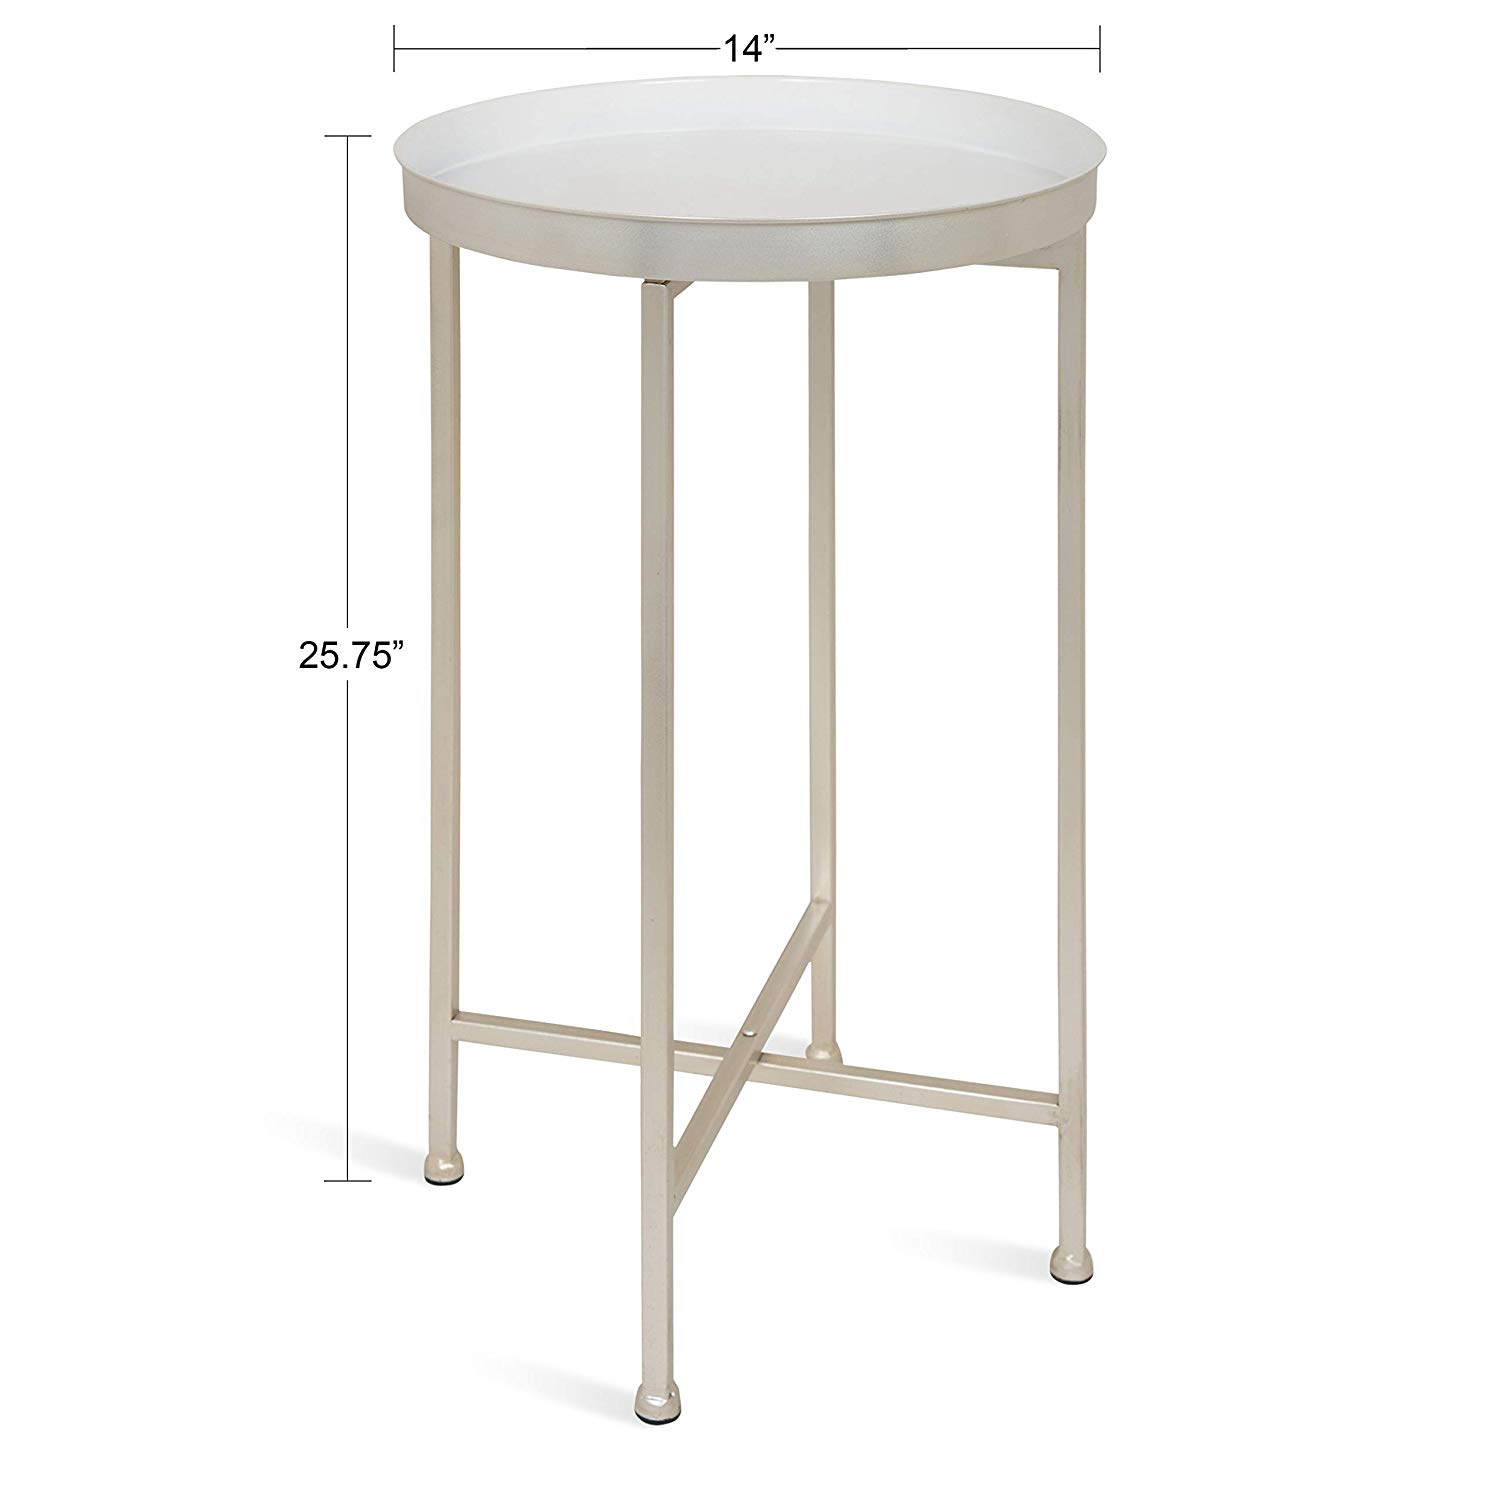 kate and laurel celia round metal foldable tray iron accent table white with silver base kitchen dining high bedside interior ideas christmas tree storage box deck cymbal bag